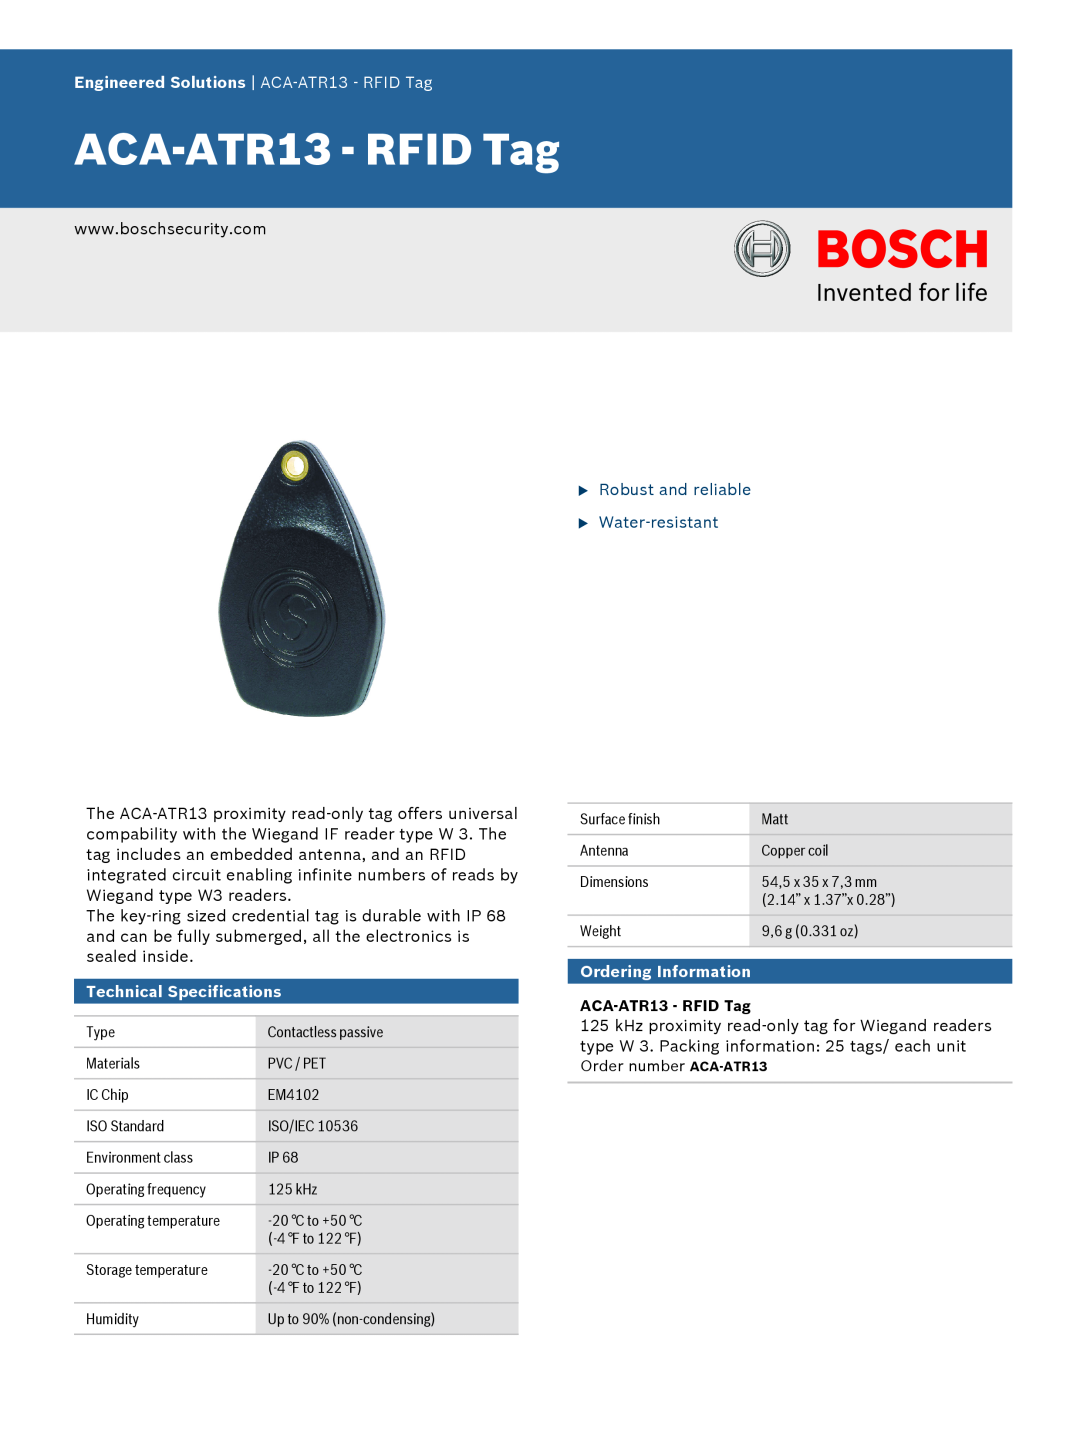 Bosch Appliances ACAATR13 technical specifications Engineered Solutions ACA-ATR13- RFID Tag, Technical Specifications 